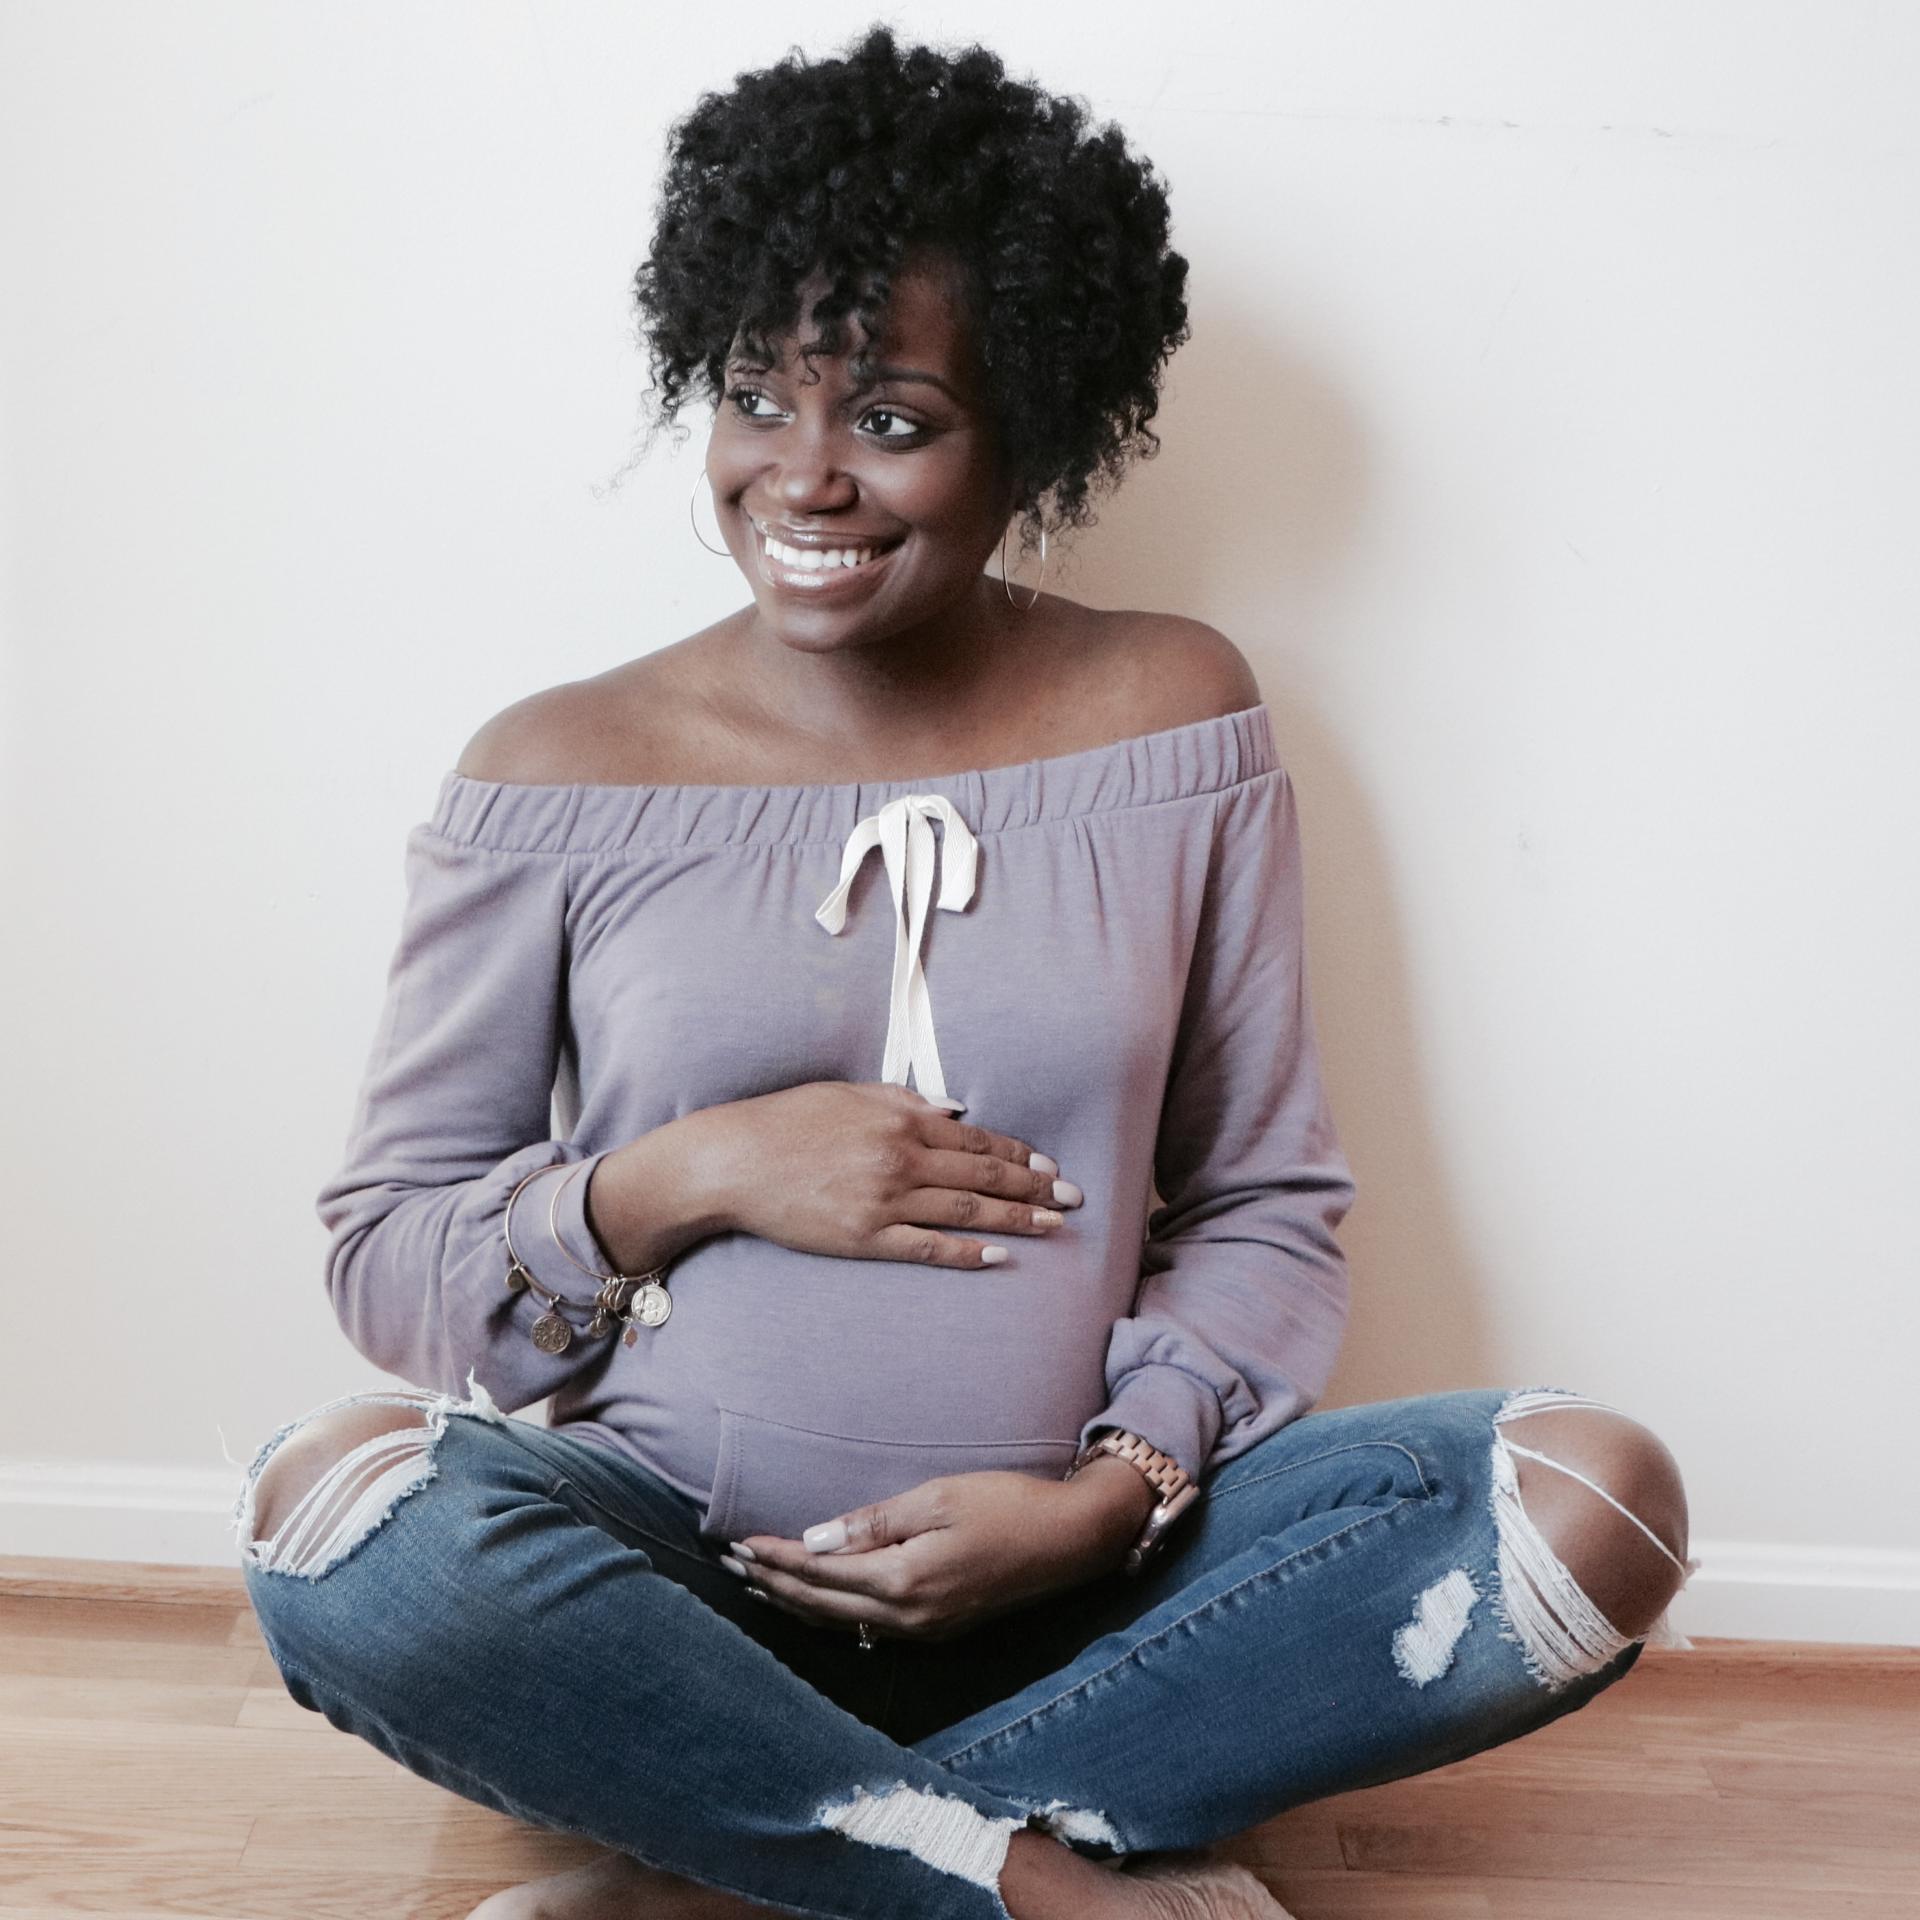 Shop PinkBlush For Affordable Maternity Wear